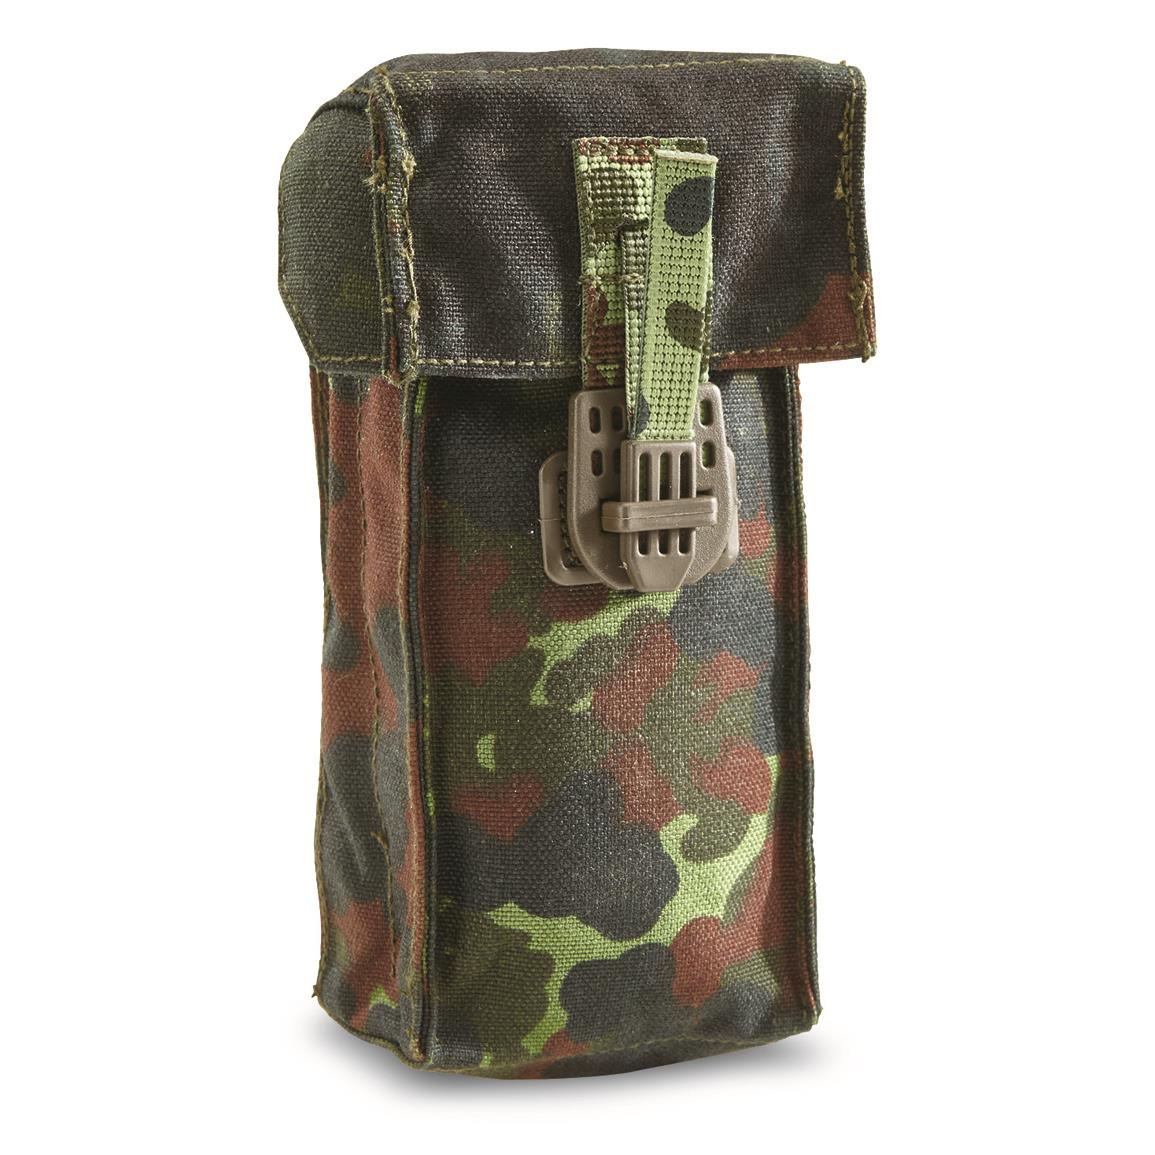 German Military Surplus Flecktarn Mag Pouches, 2 pack, Used